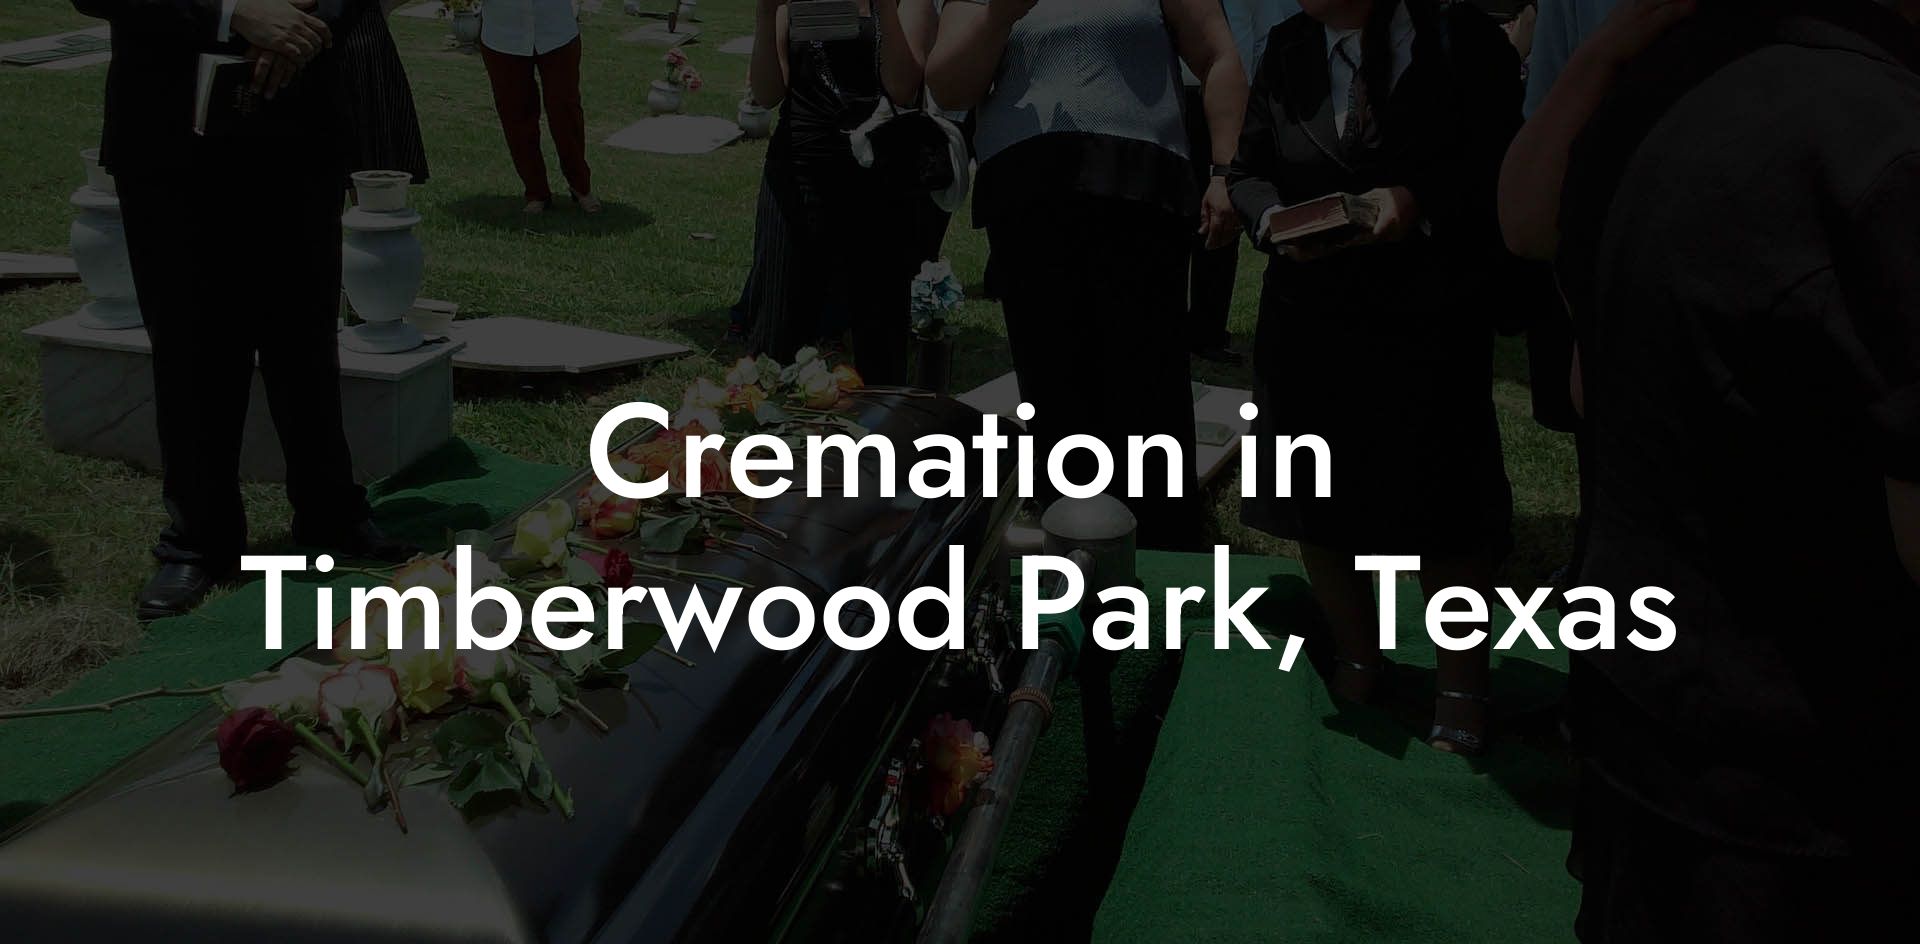 Cremation in Timberwood Park, Texas